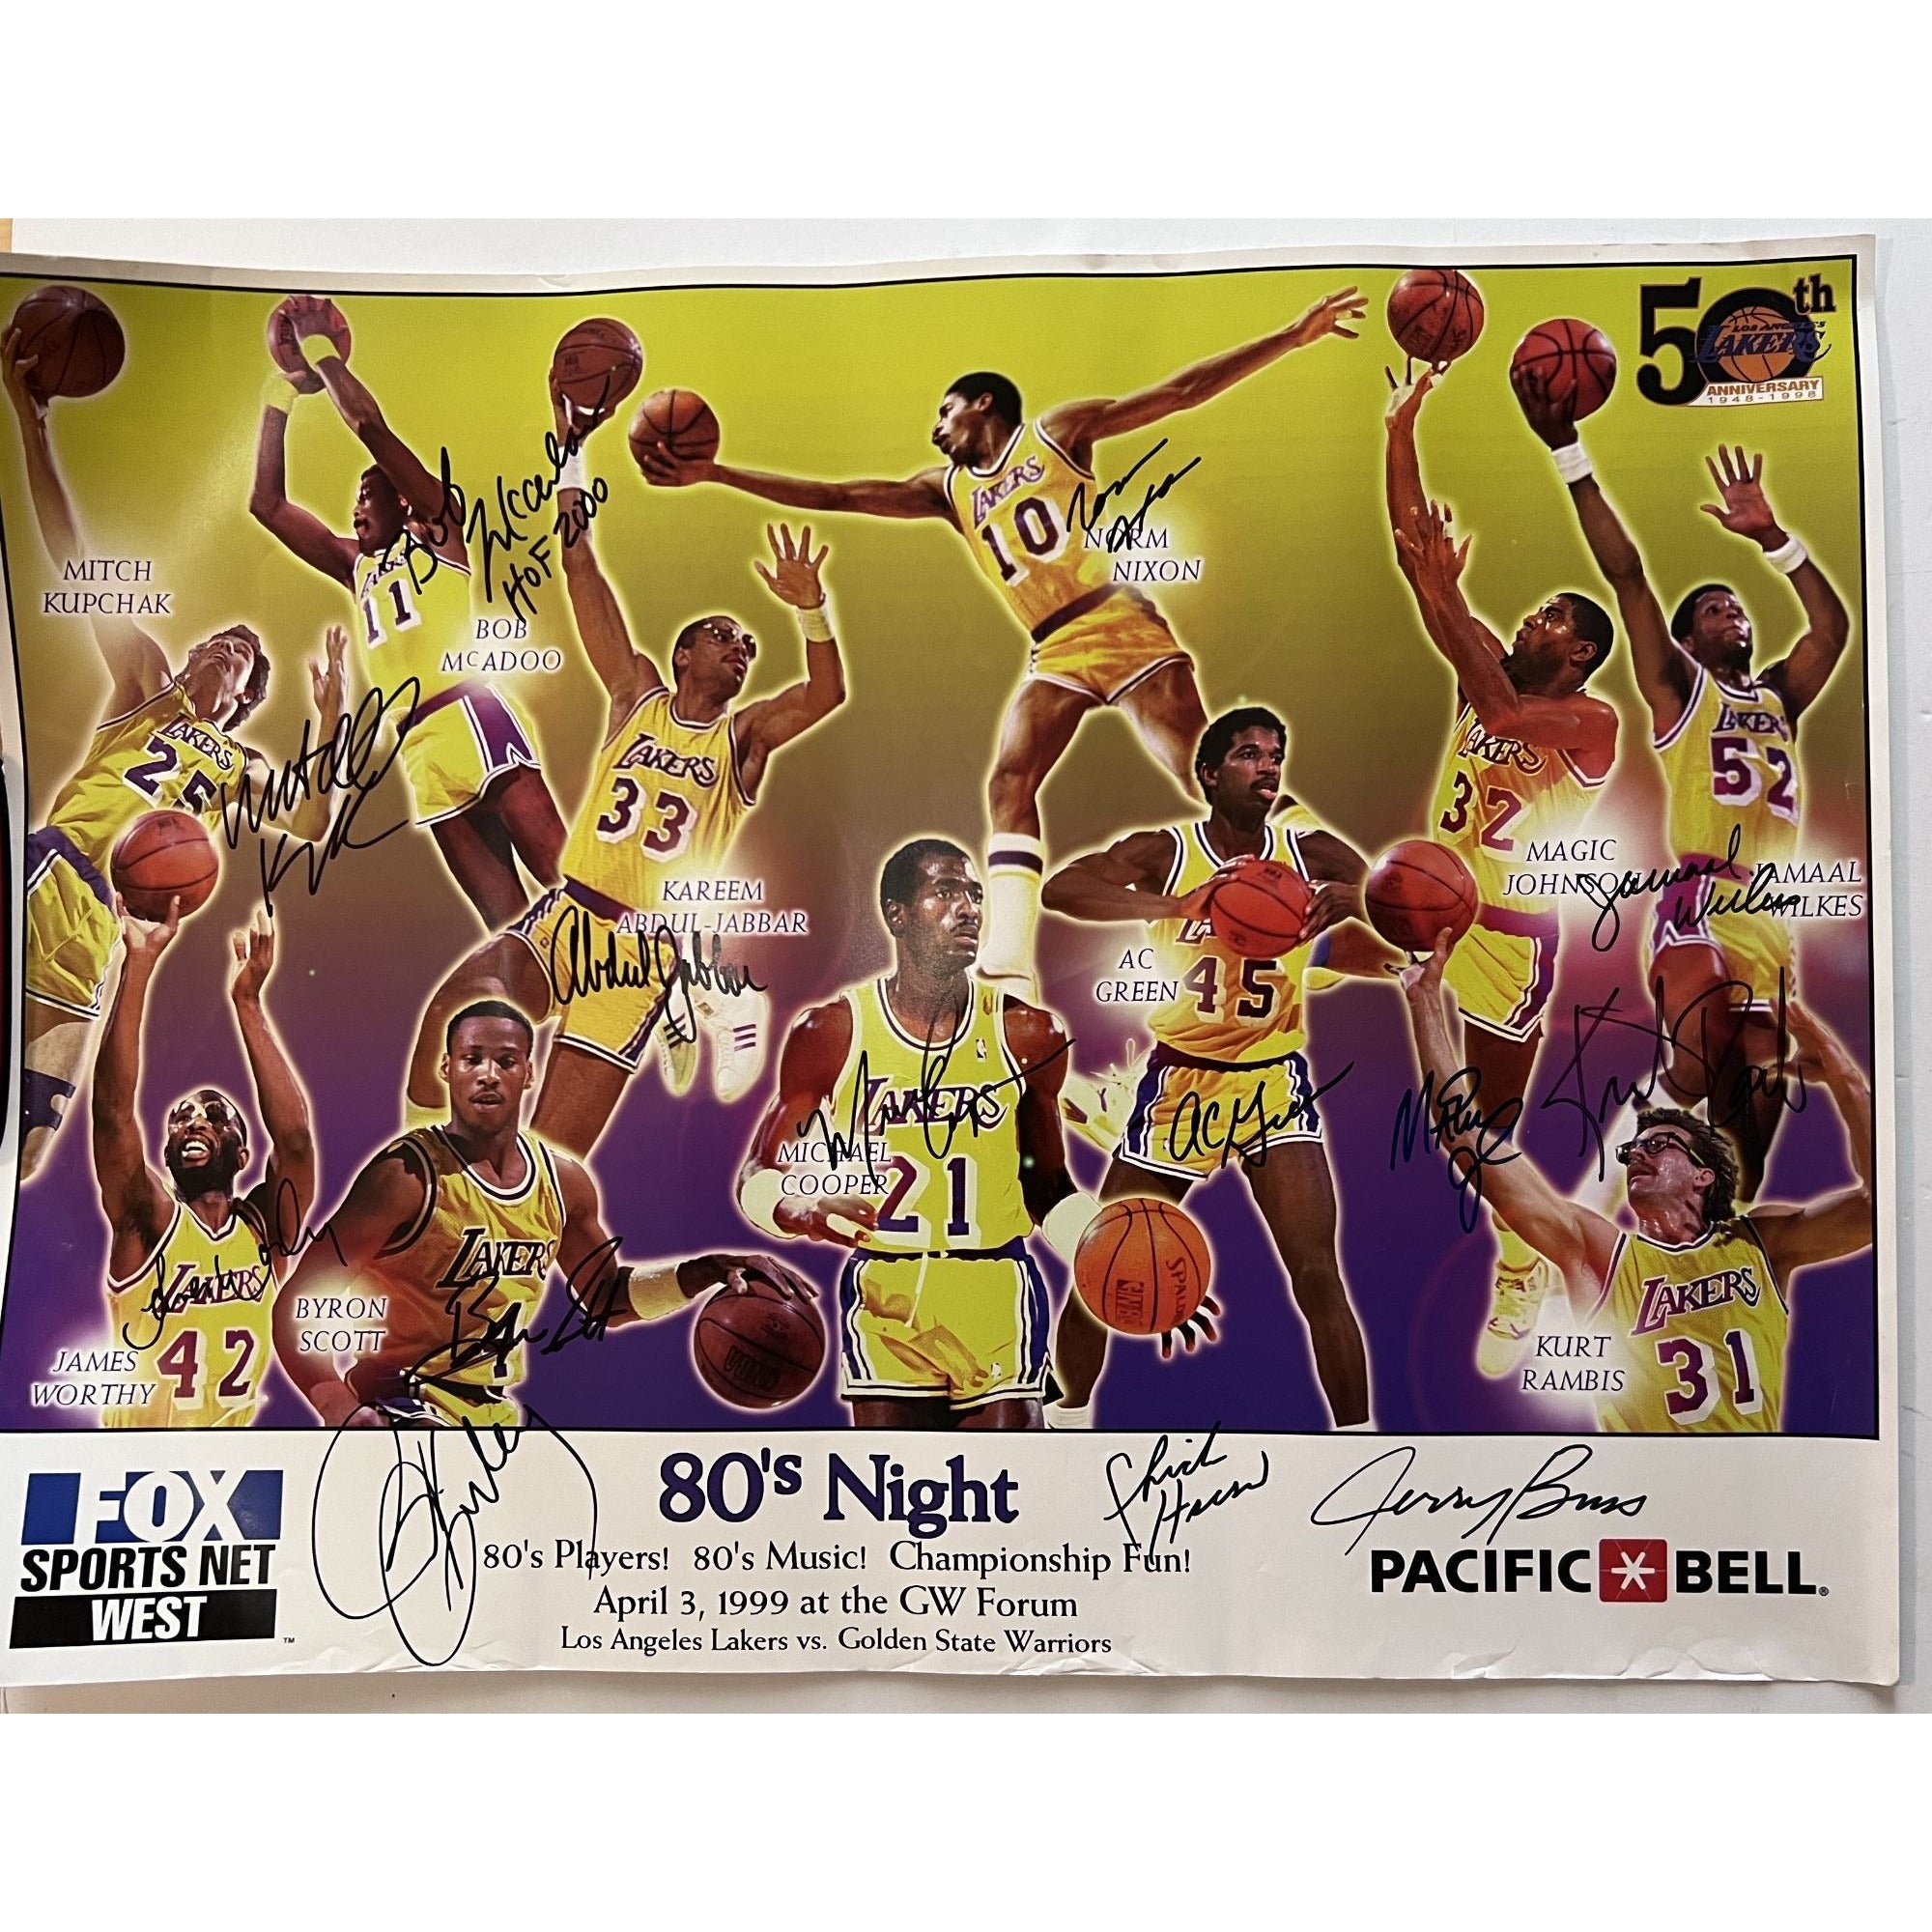 Los Angeles Lakers vintage poster Kareem Abdul-Jabbar Magic Johnson Pat Riley James Worthy 24x18 poster signed with proof